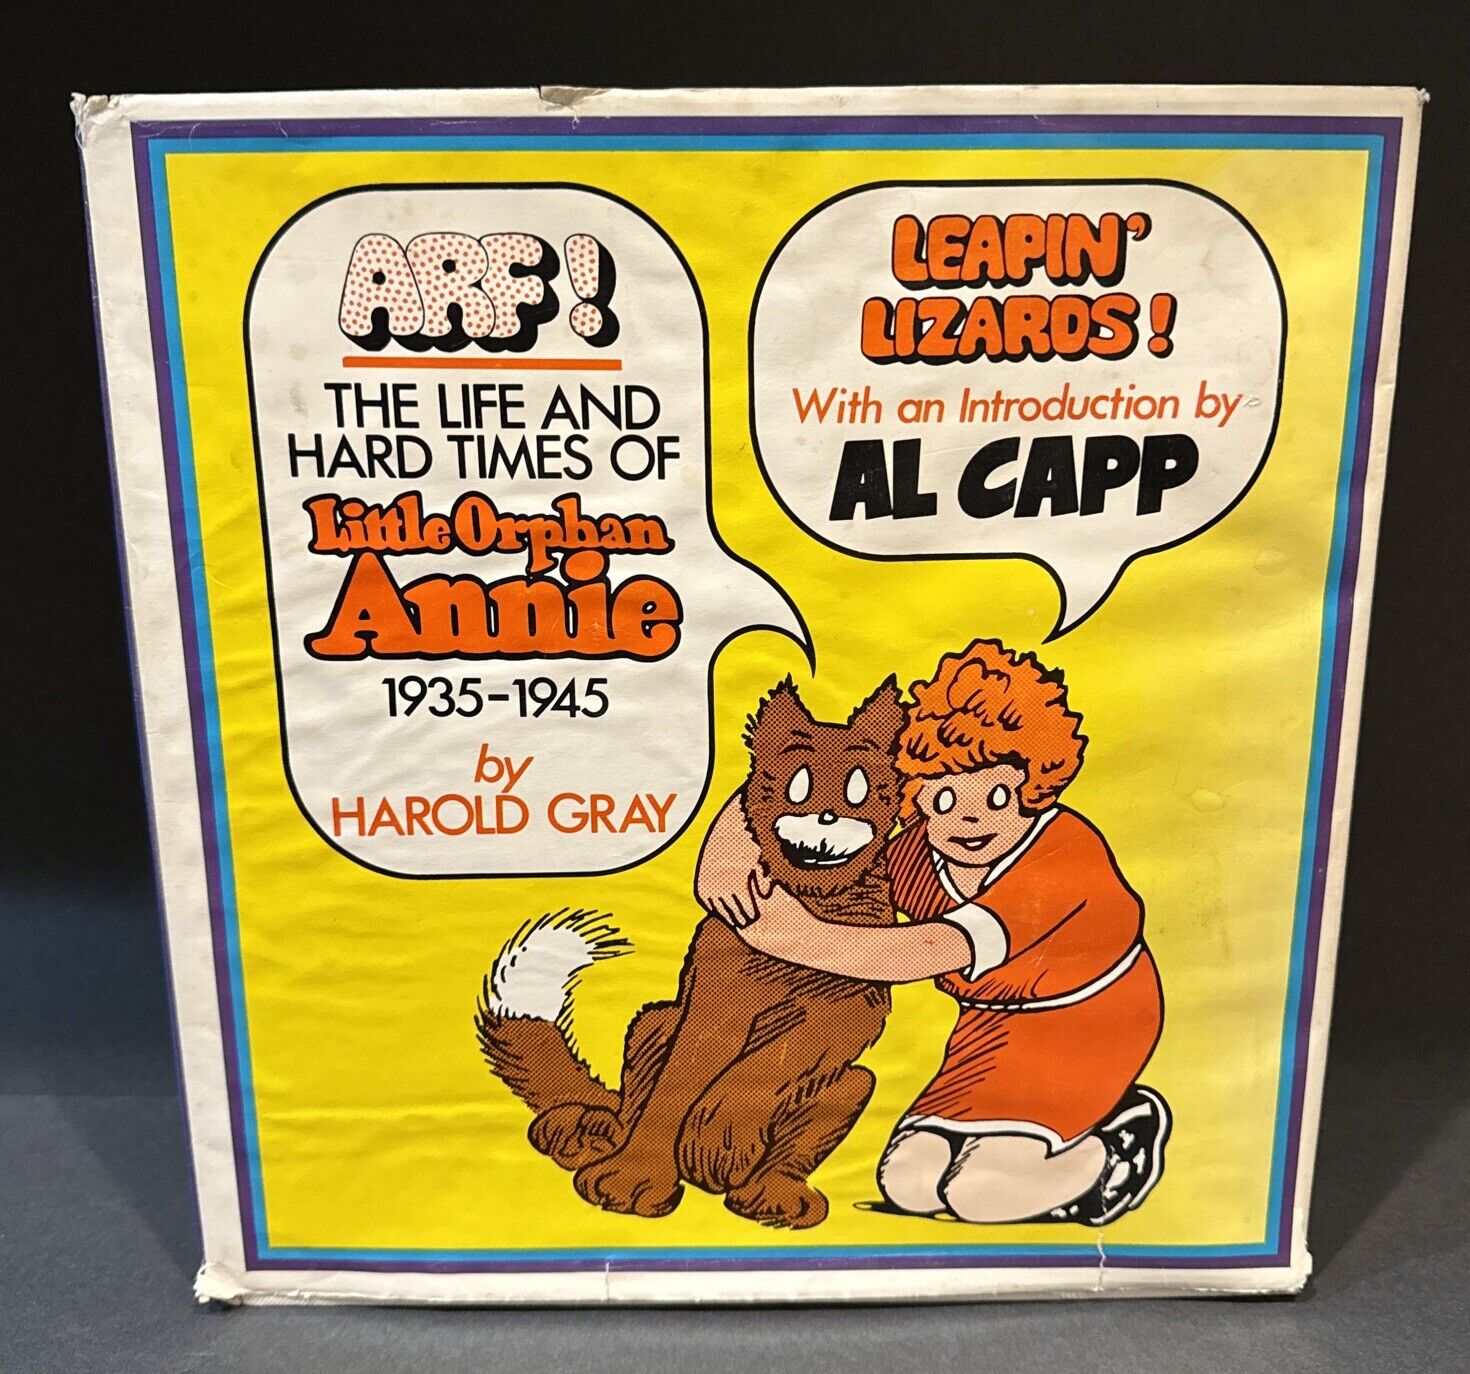 Arf The Life and Hard Times of Little Orphan Annie Vintage Hard Cover Book